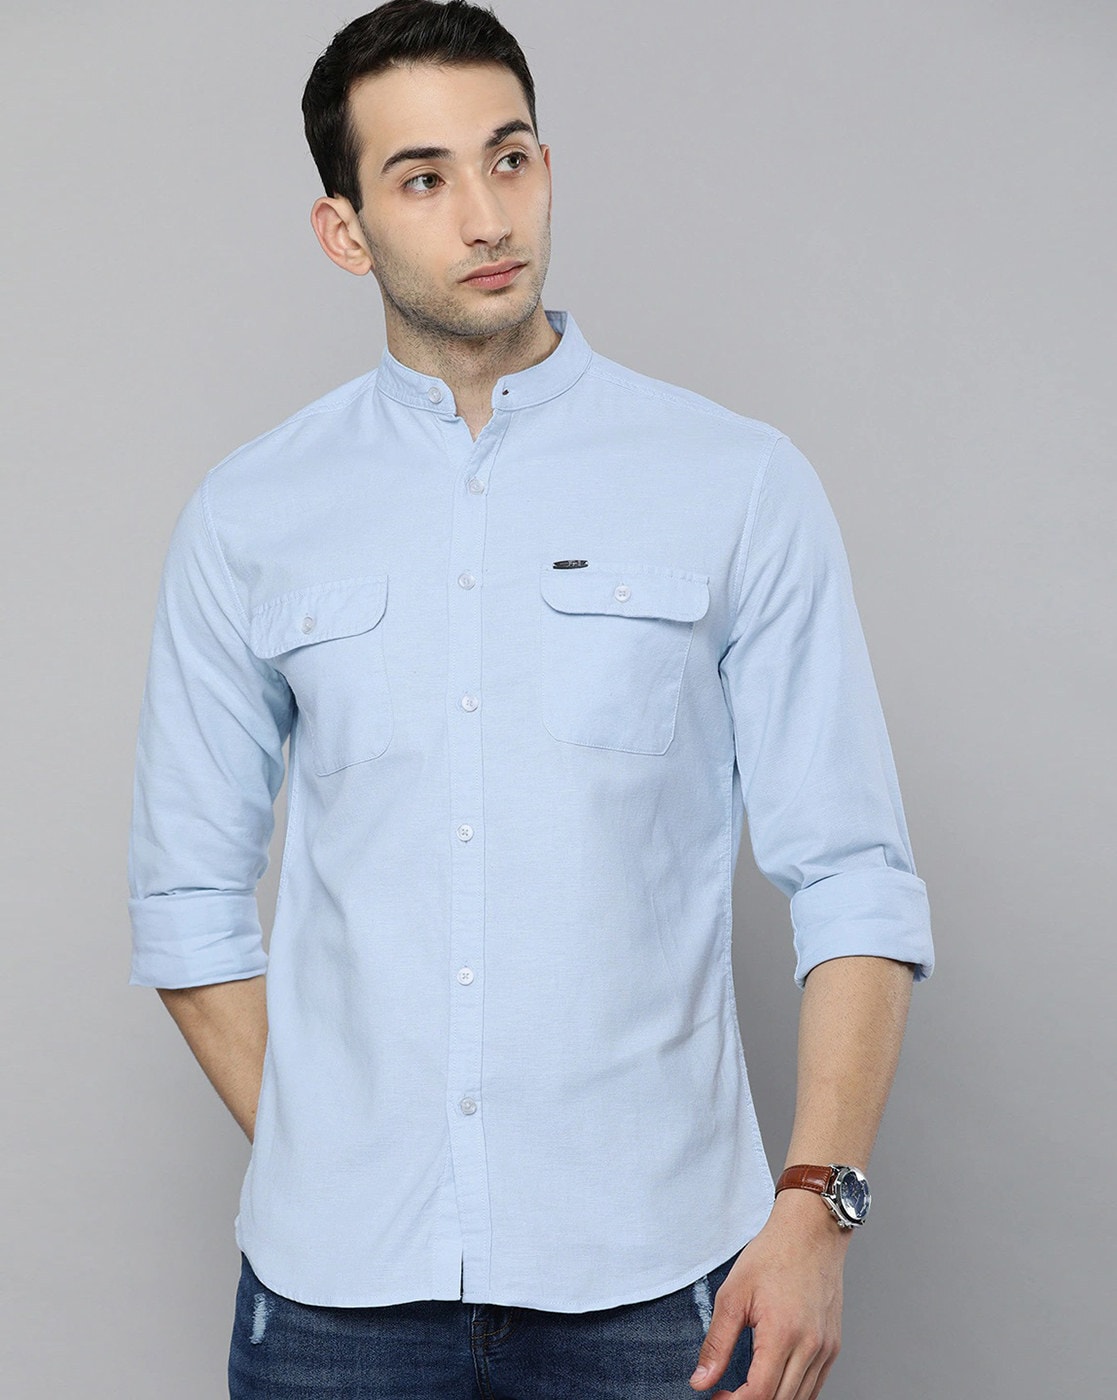 Touch denim blue color intricately printed with patch pocket full-sleeve  cotton regular-fit formal shirt